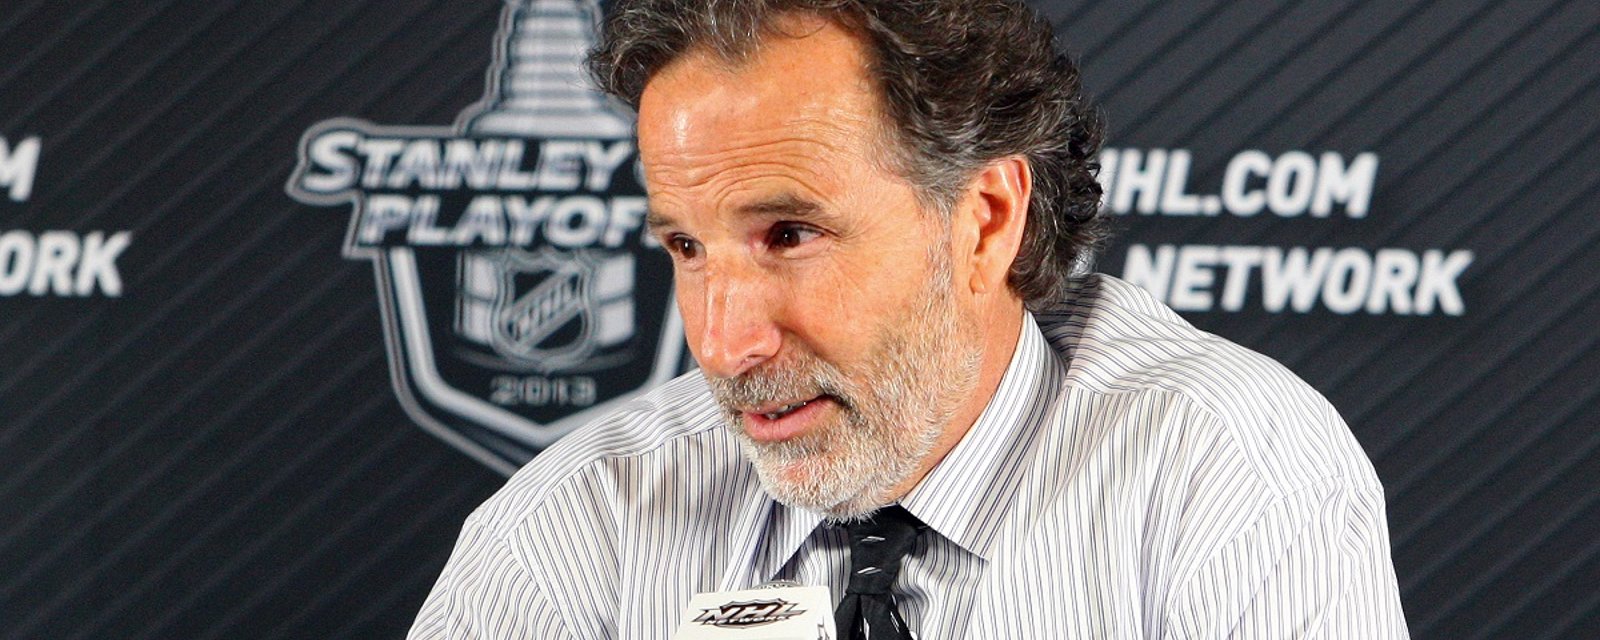 John Tortorella calls for the end of the shoot out with very strong comments. 